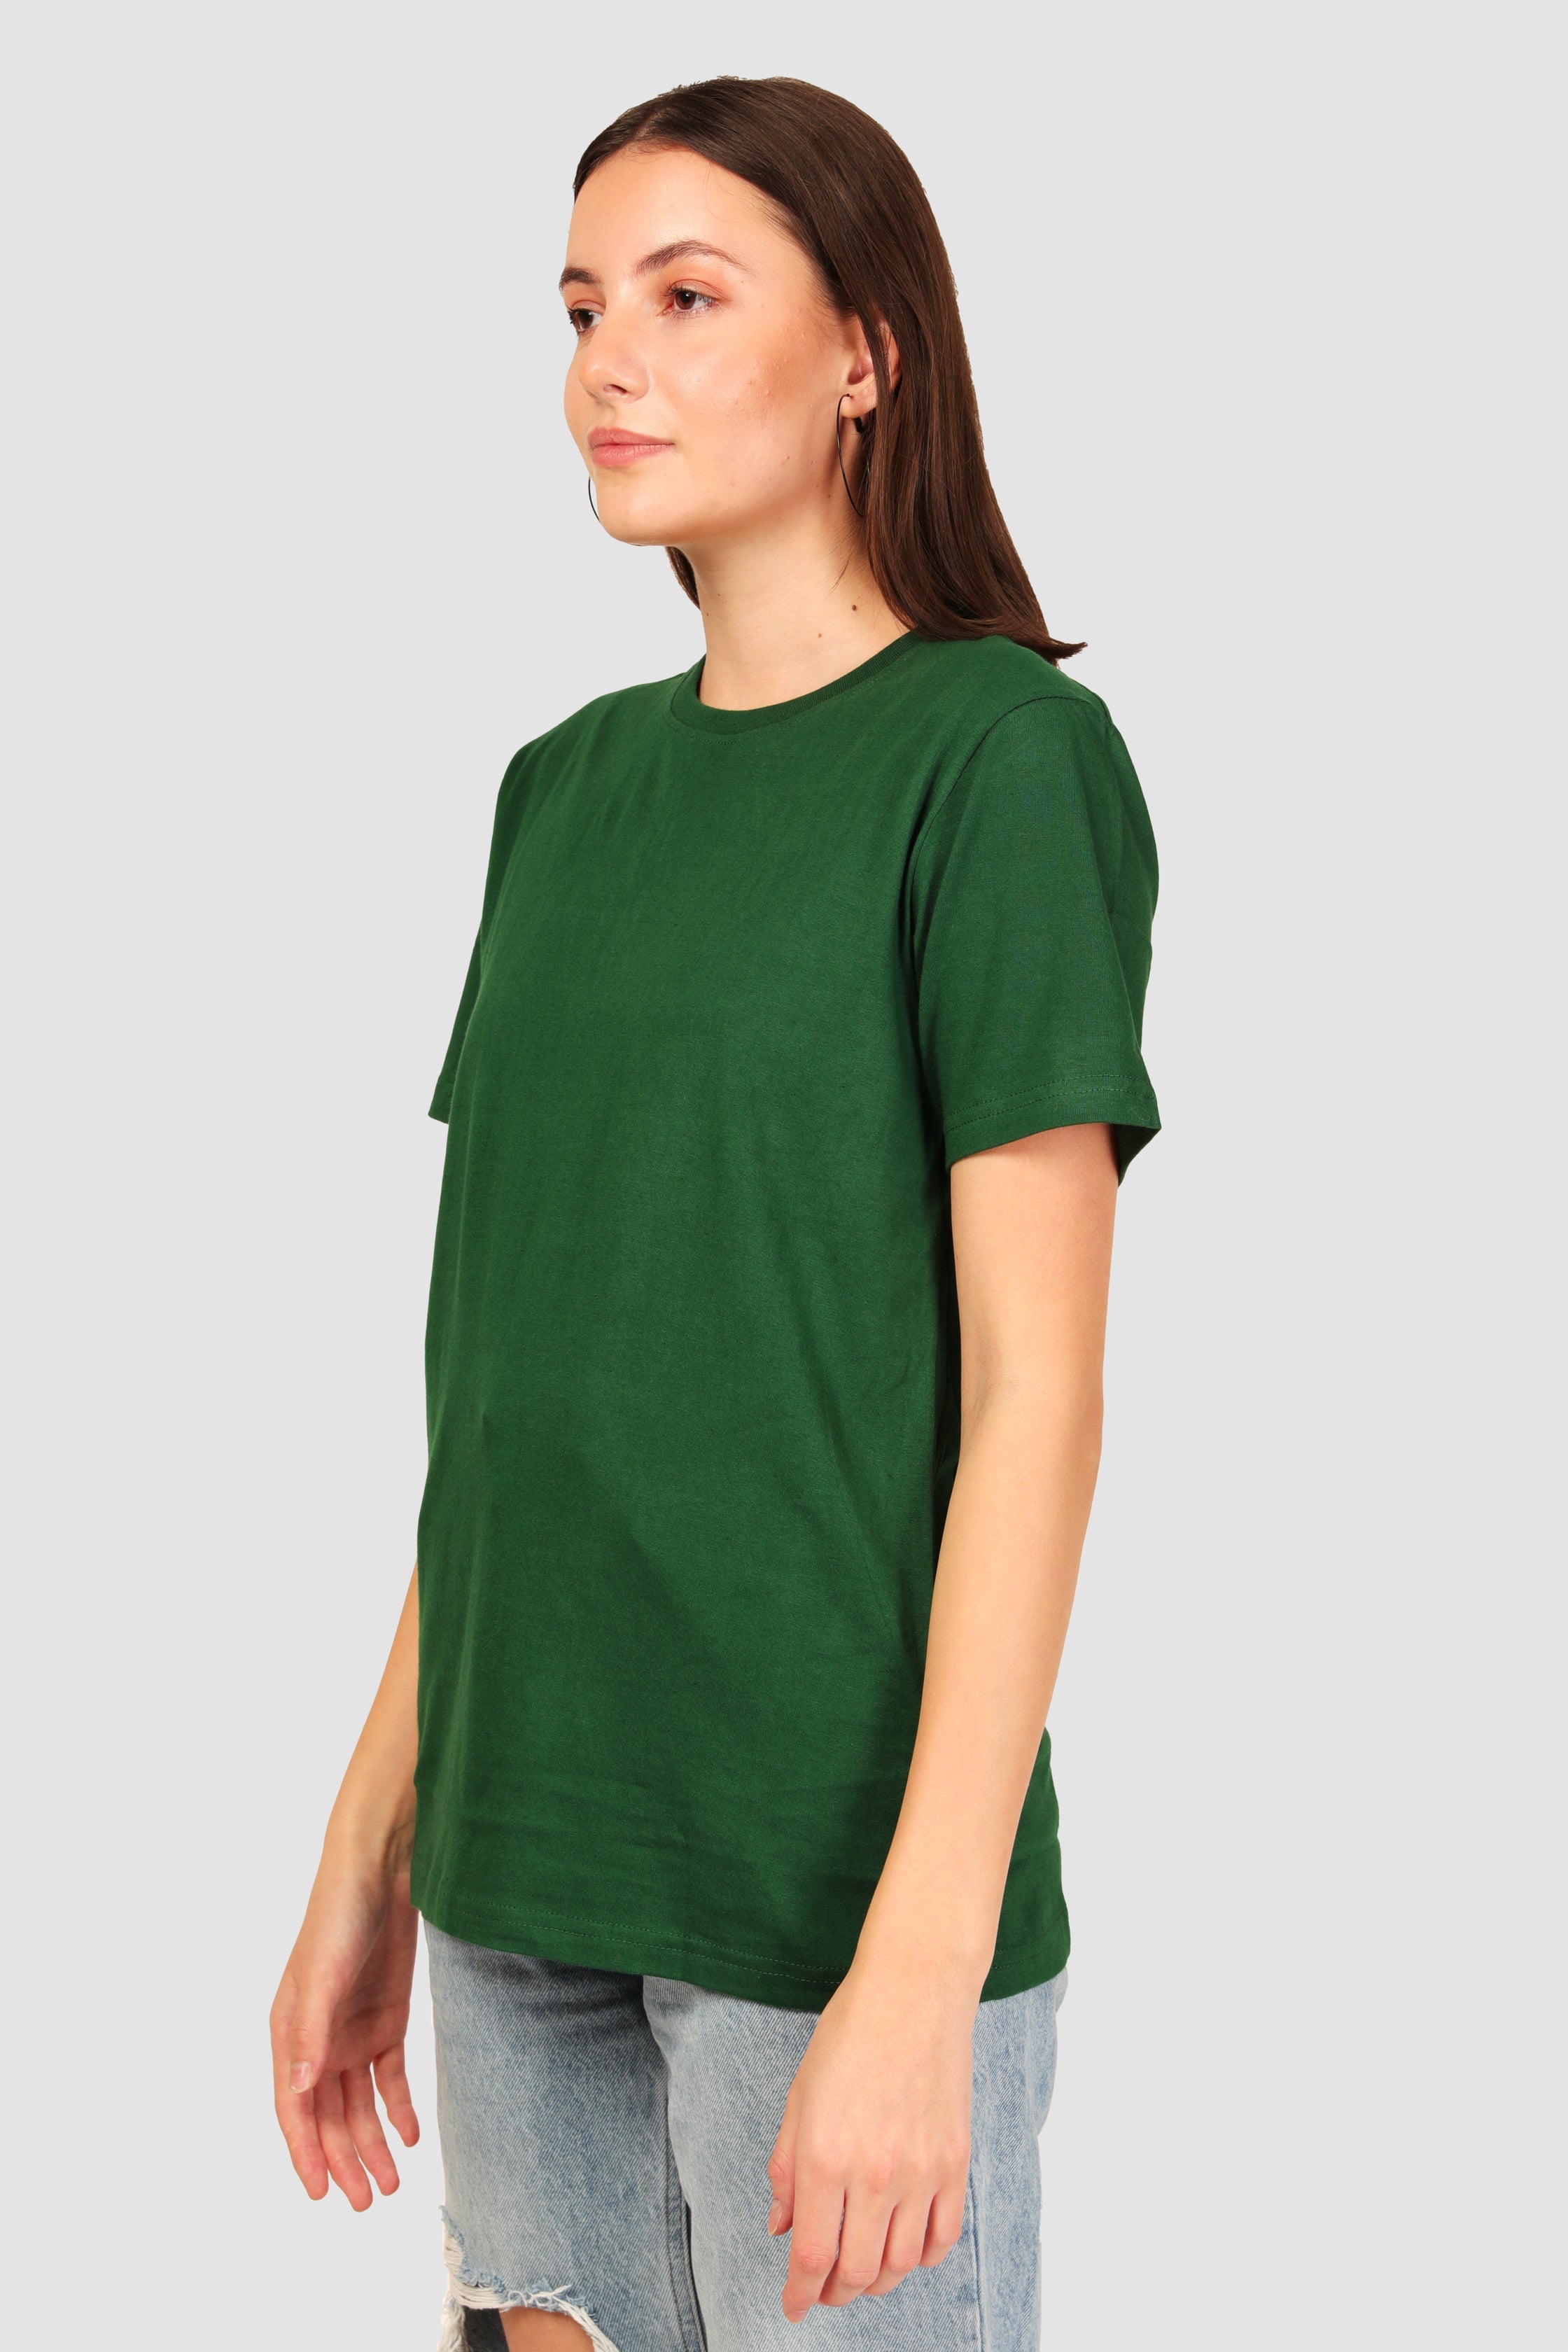 GREEN SOLID CREW NECK T-SHIRT